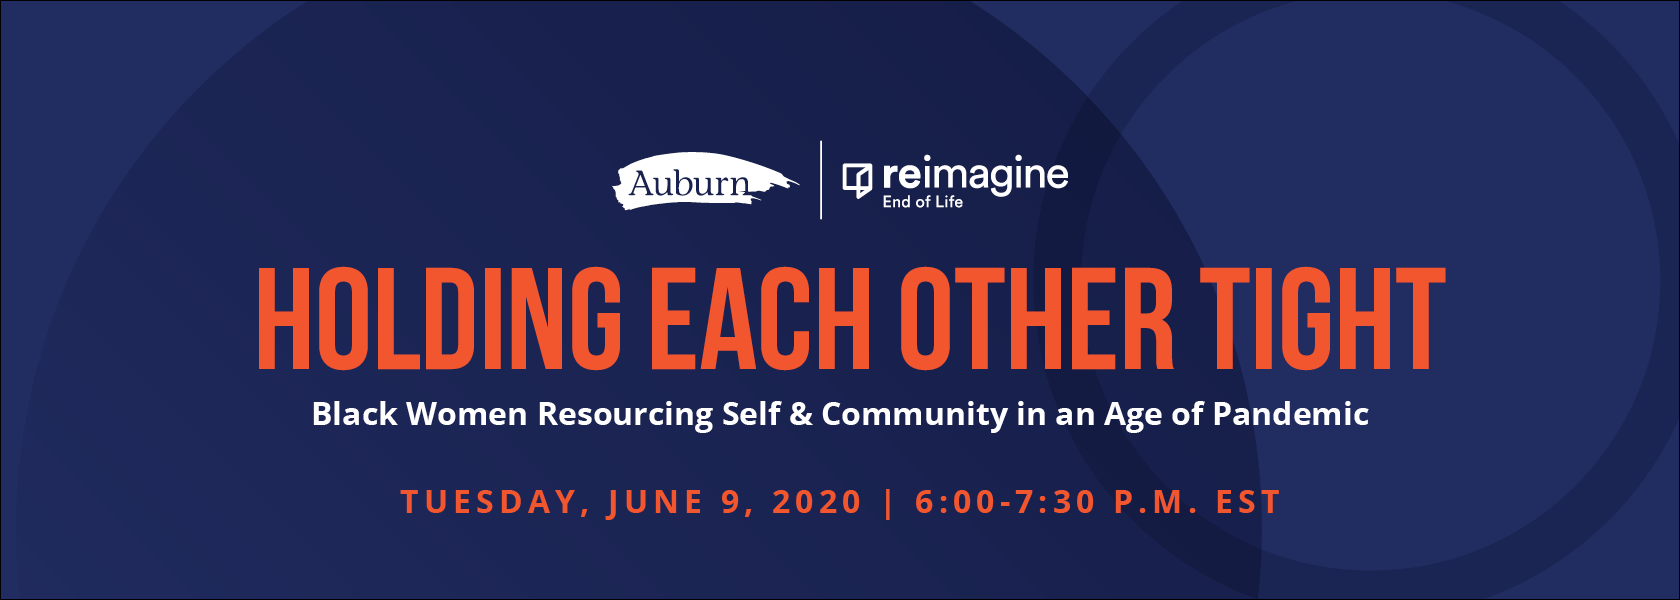 Holding Each Other Tight: Black Women Resourcing Self and Community in an Age of Pandemic June 9, 2020 Virtual Event, 6:00-7:30 pm ET